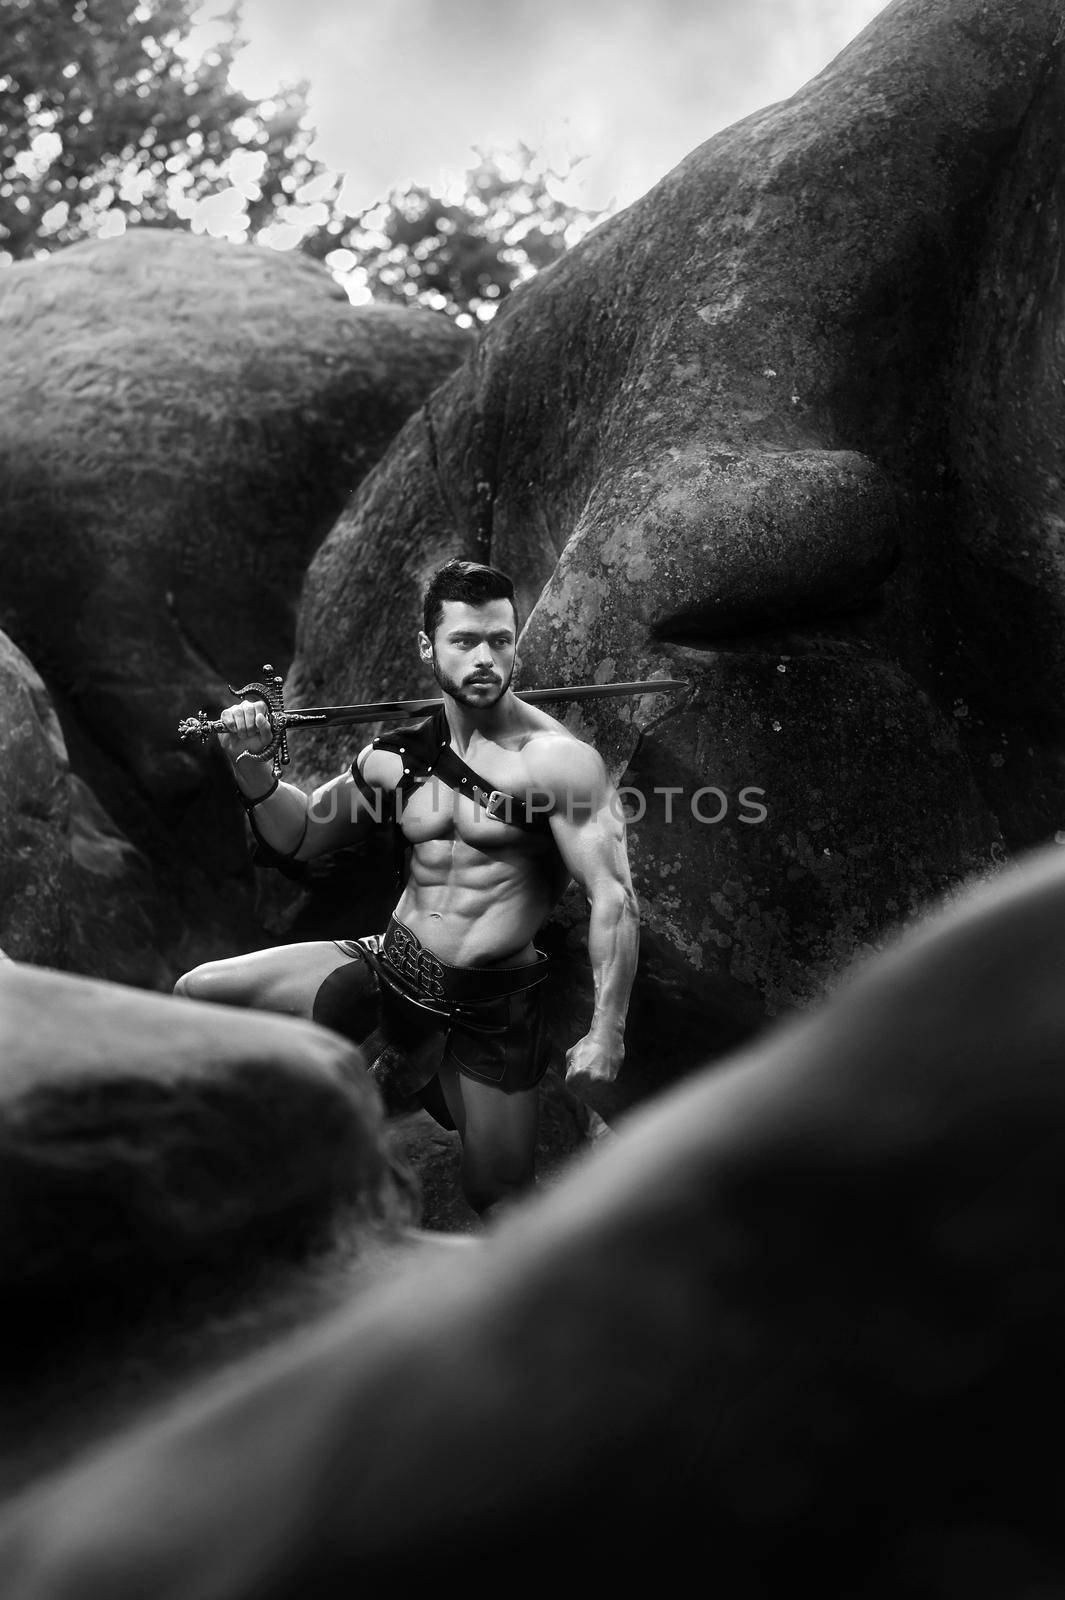 He knows no fear. Monochrome vertical portrait of a Spartan warrior with a sword looking around at the forest standing near the rocks